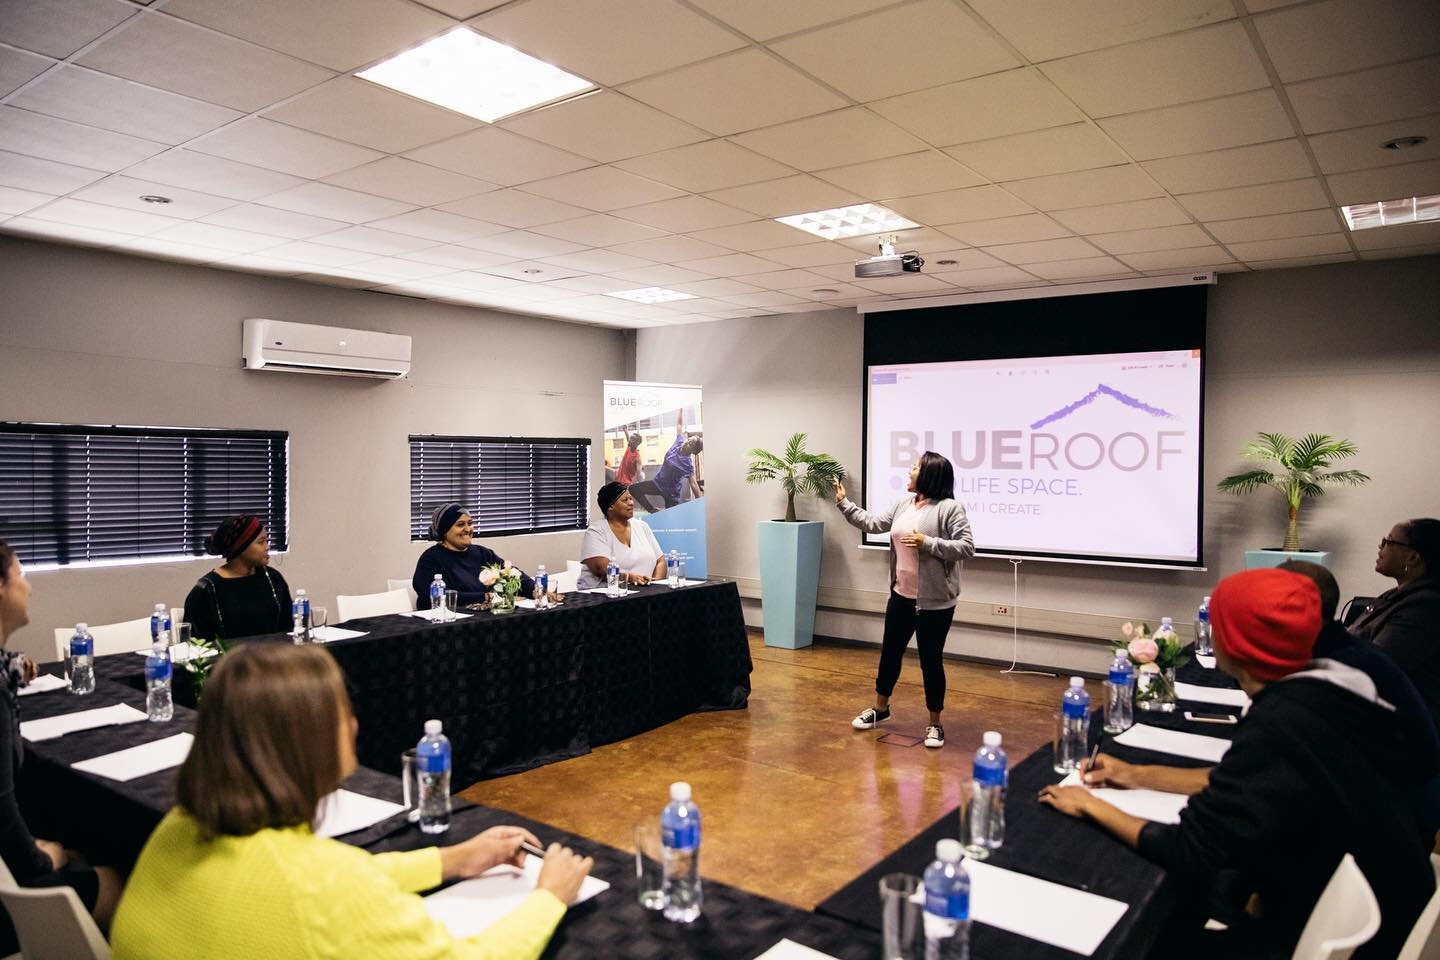 If you are looking for a venue for your next private or public gathering, the Blue Roof has a space for you!
.
.
The @blueroof_lifespace  invites you to explore our quality COVID-19 compliant venue offering great value. Our vibrant, thoughtfully desi